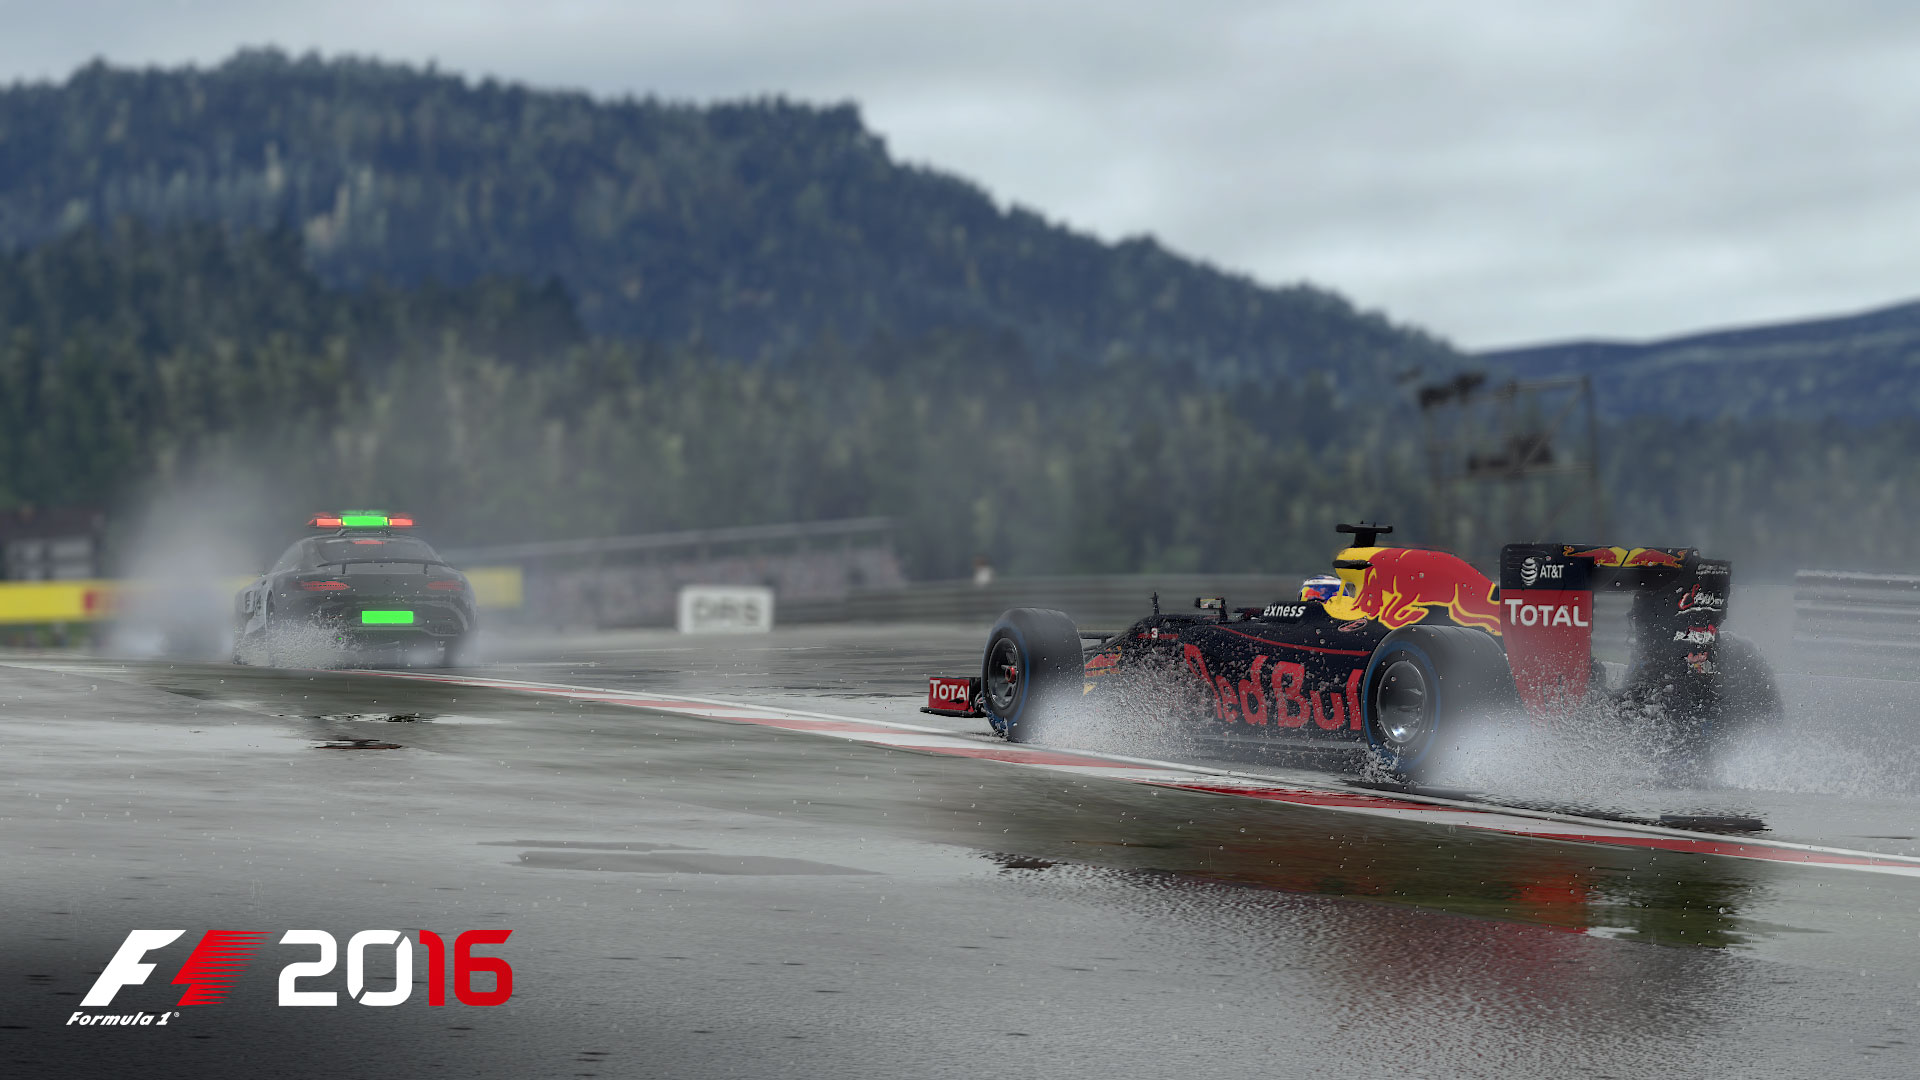 F1 2016 review Just like the real thing, except not boring Ars Technica